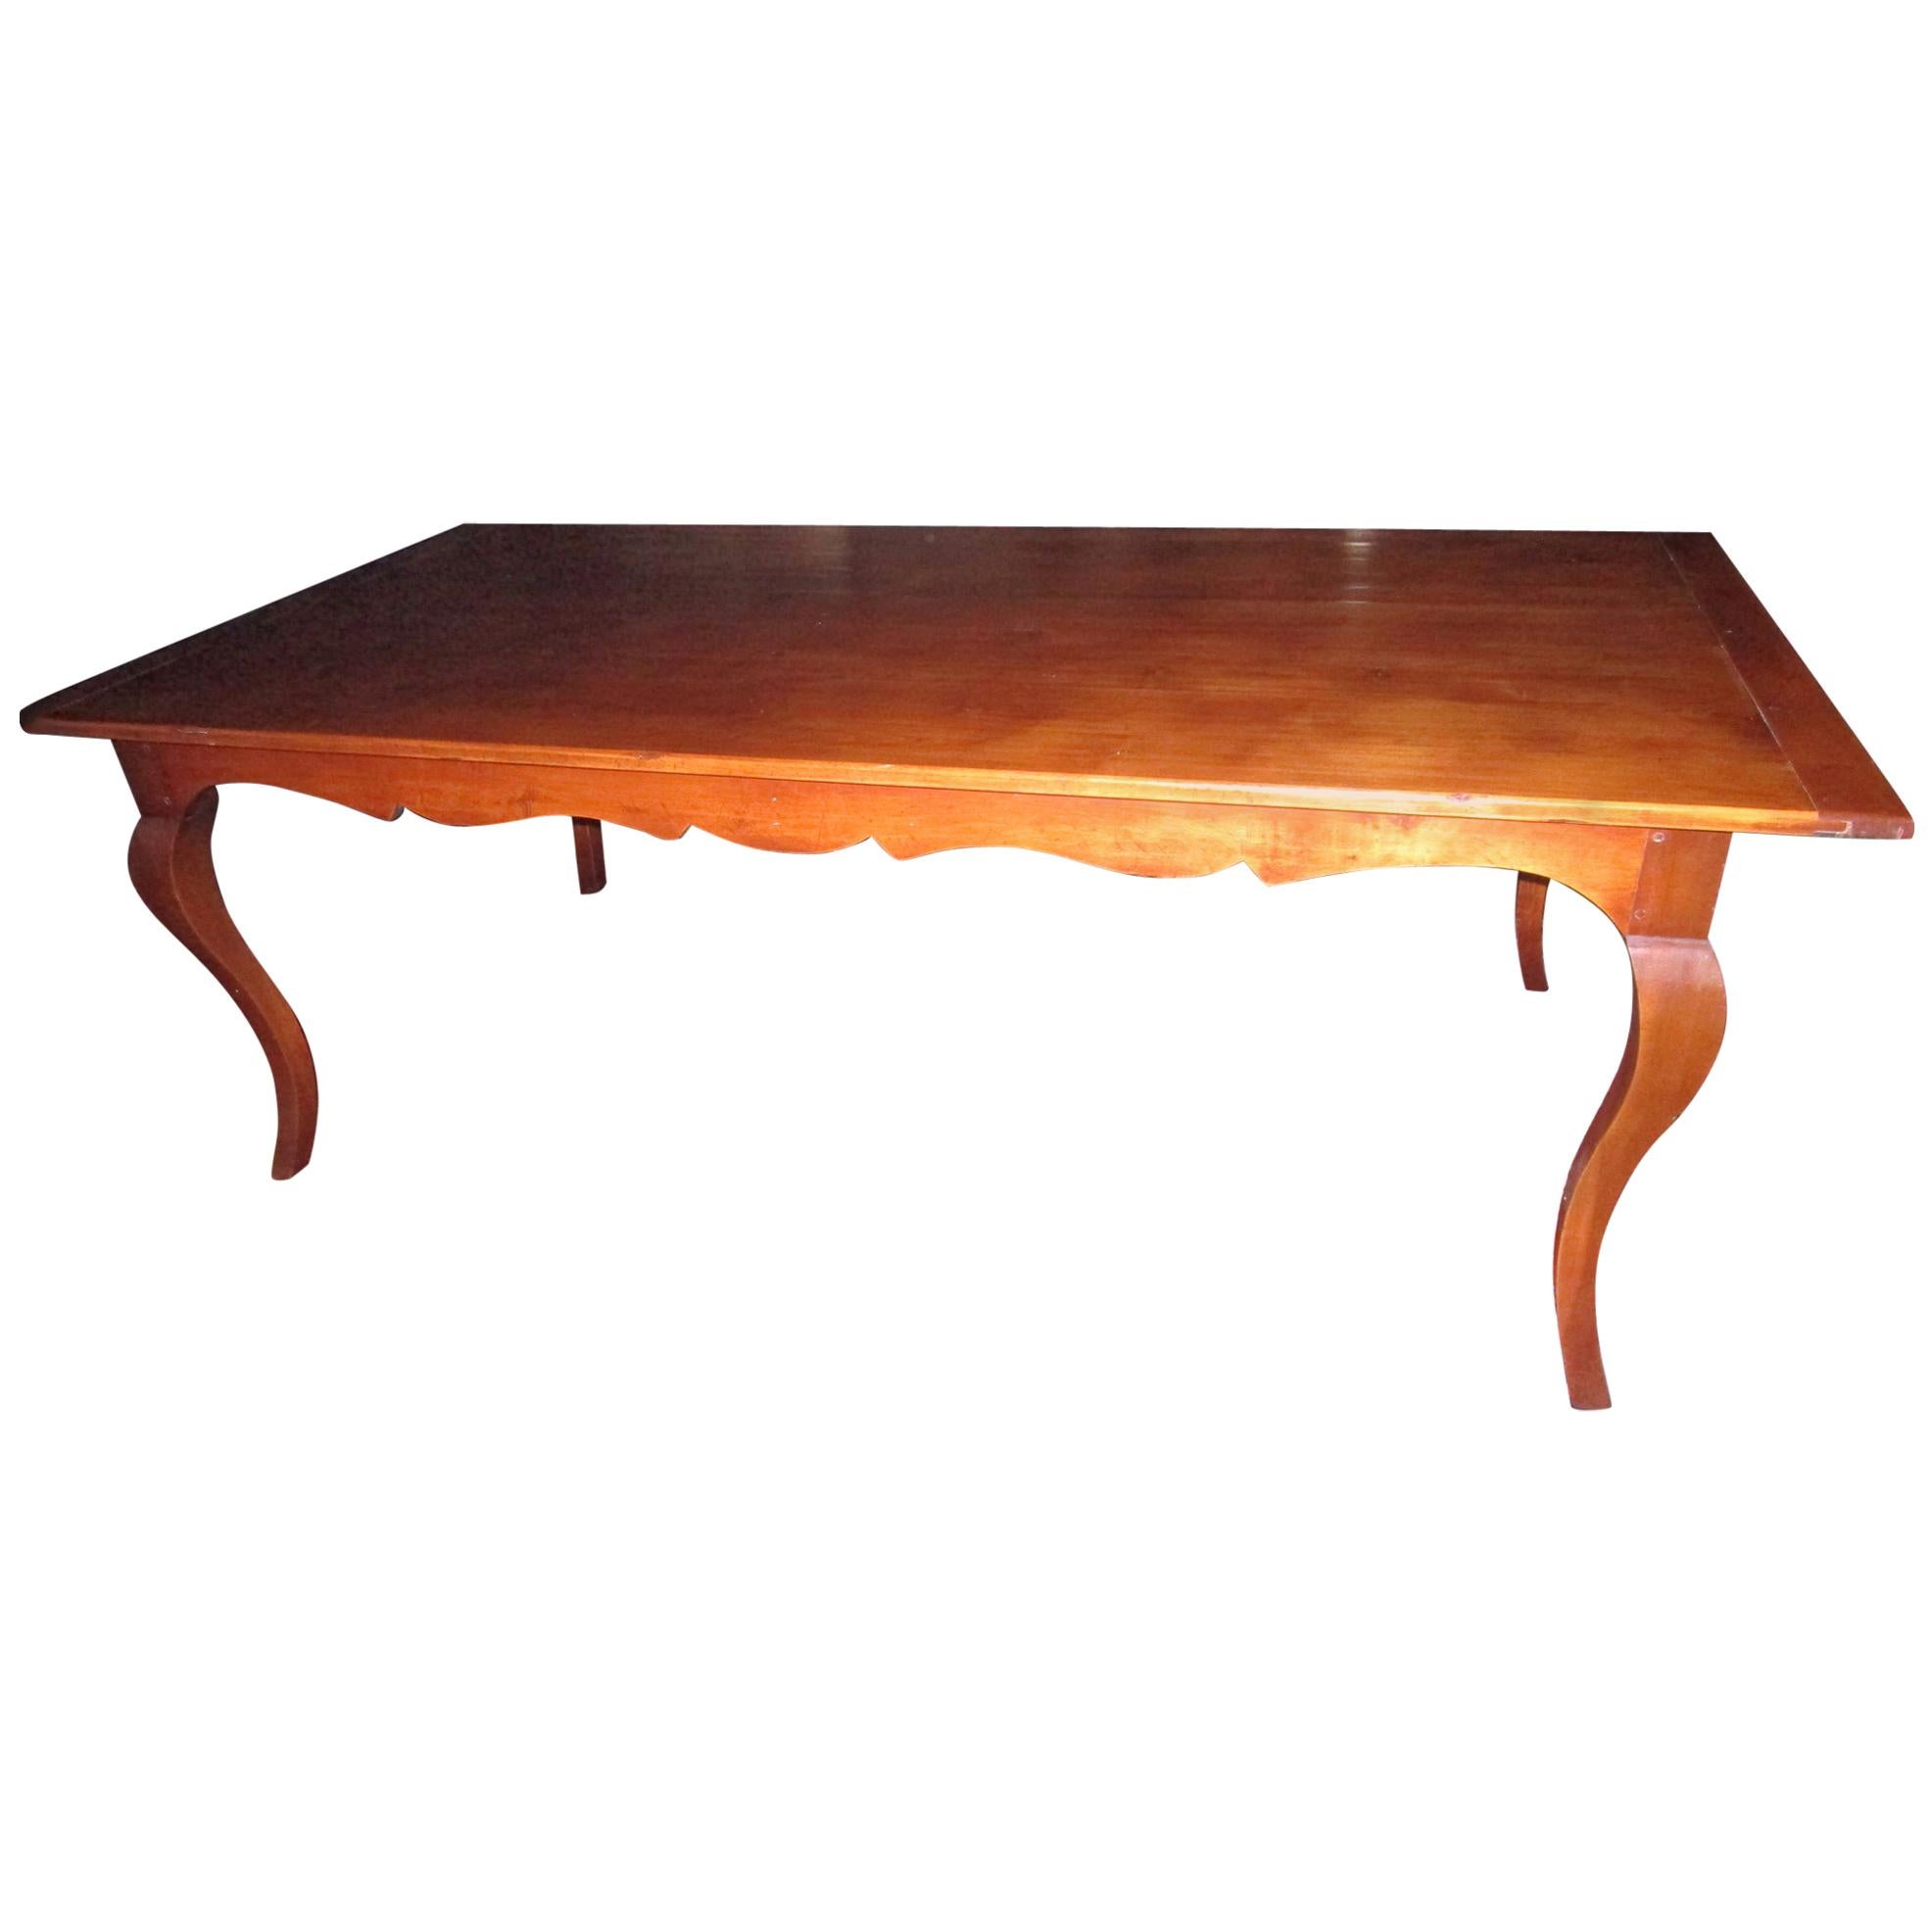 19th century French Country Fruitwood Dining Table